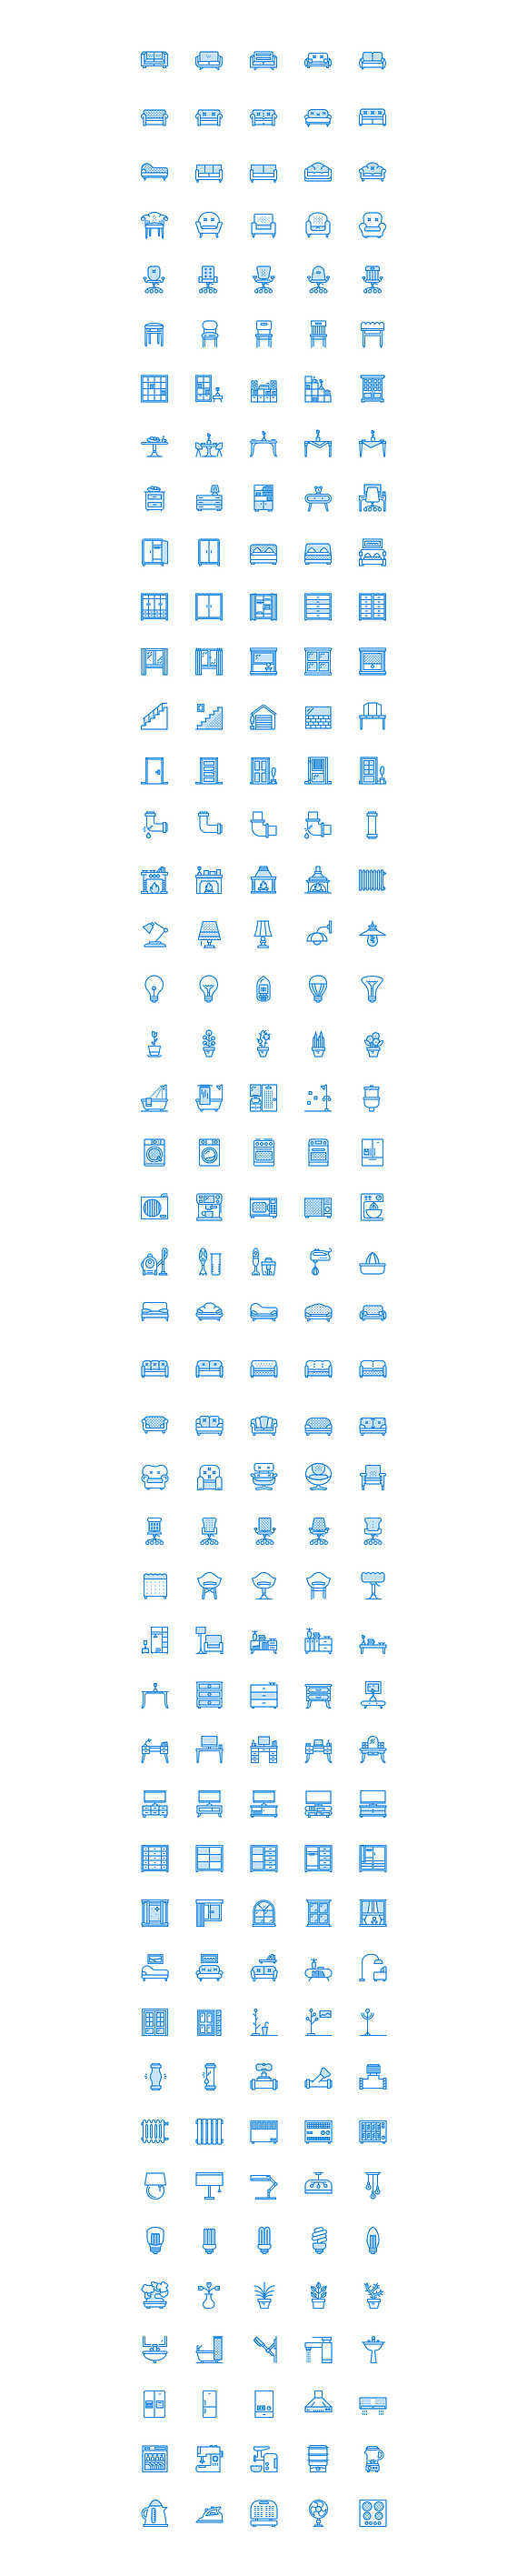 SMASHICONS - 920+ Households Icons - in Illustrations - product preview 3